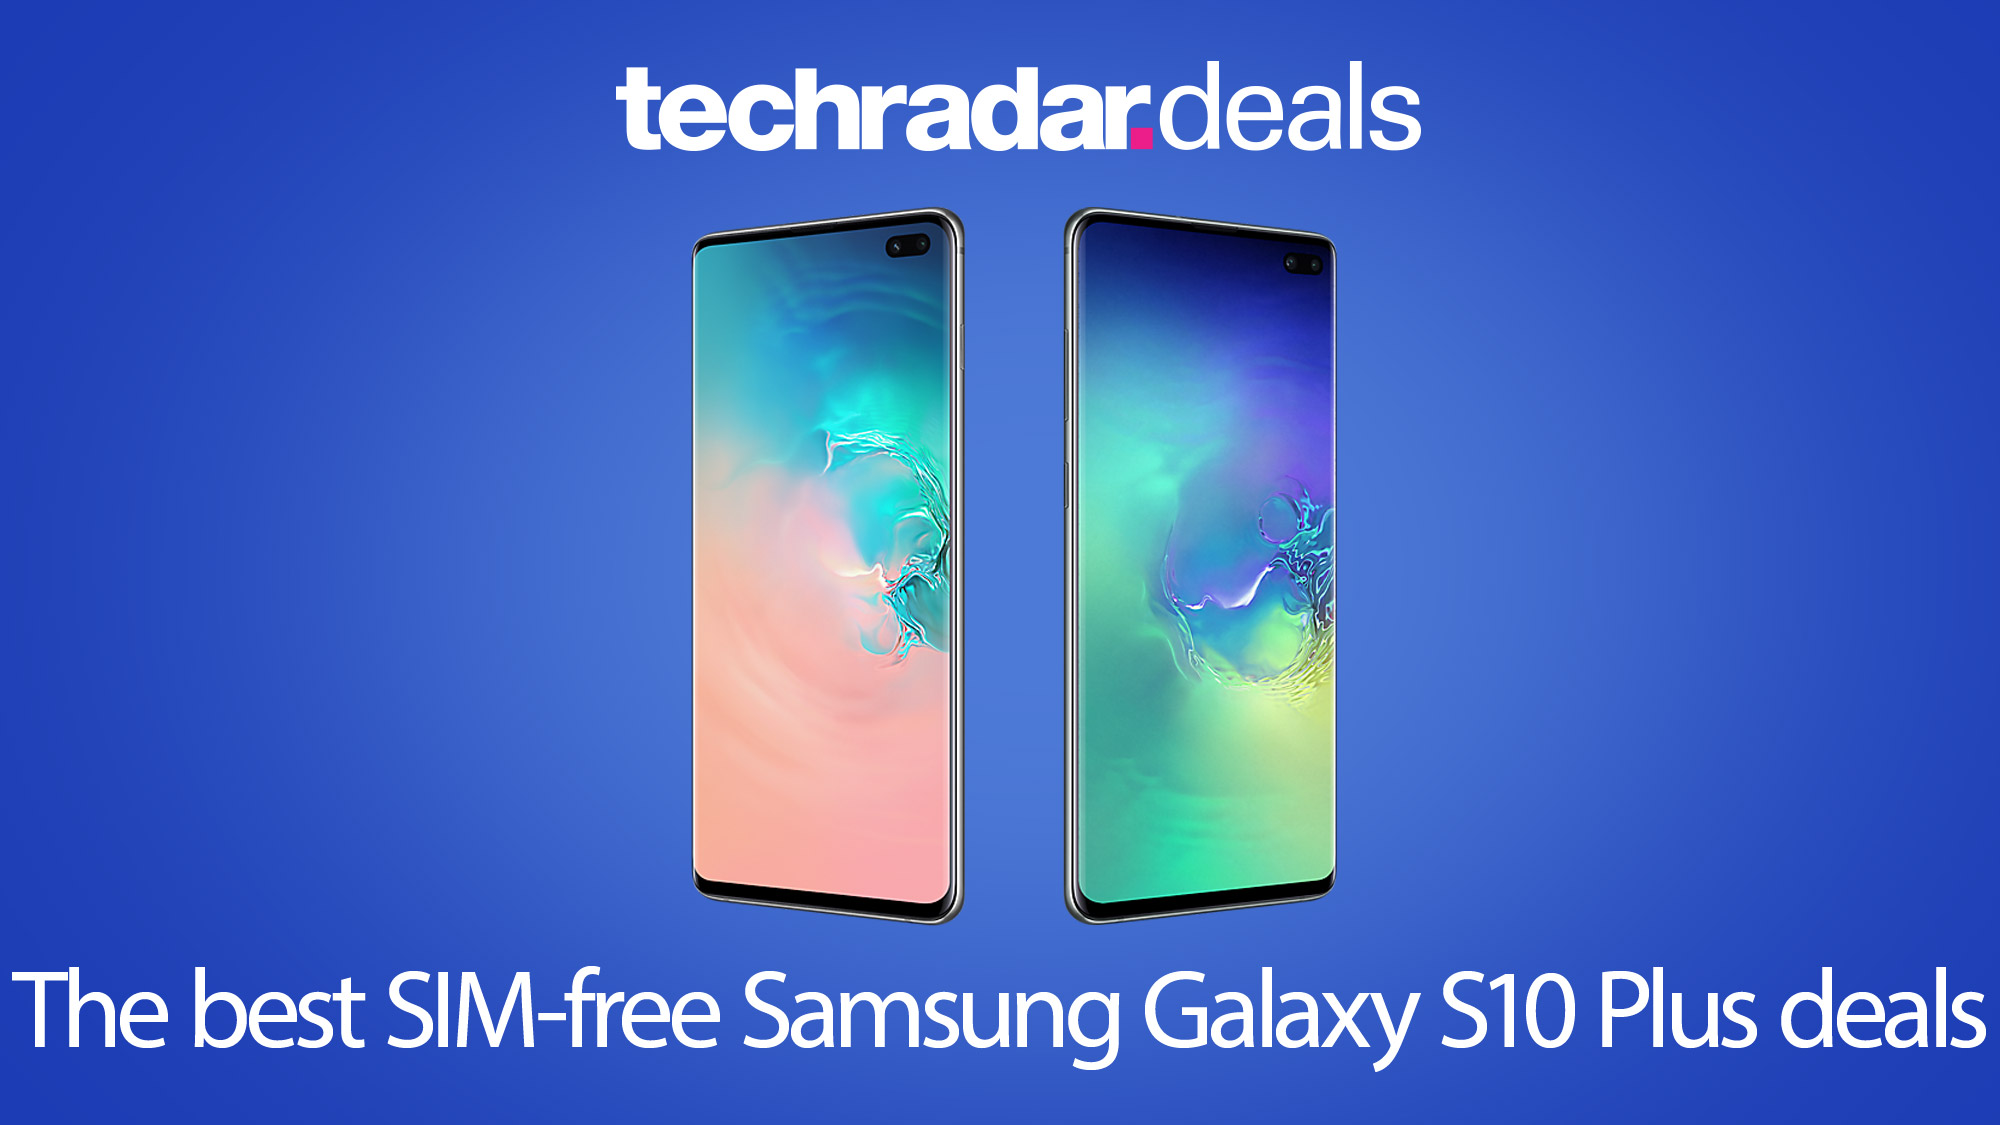 The cheapest SIMfree Samsung Galaxy S10 Plus unlocked prices in April